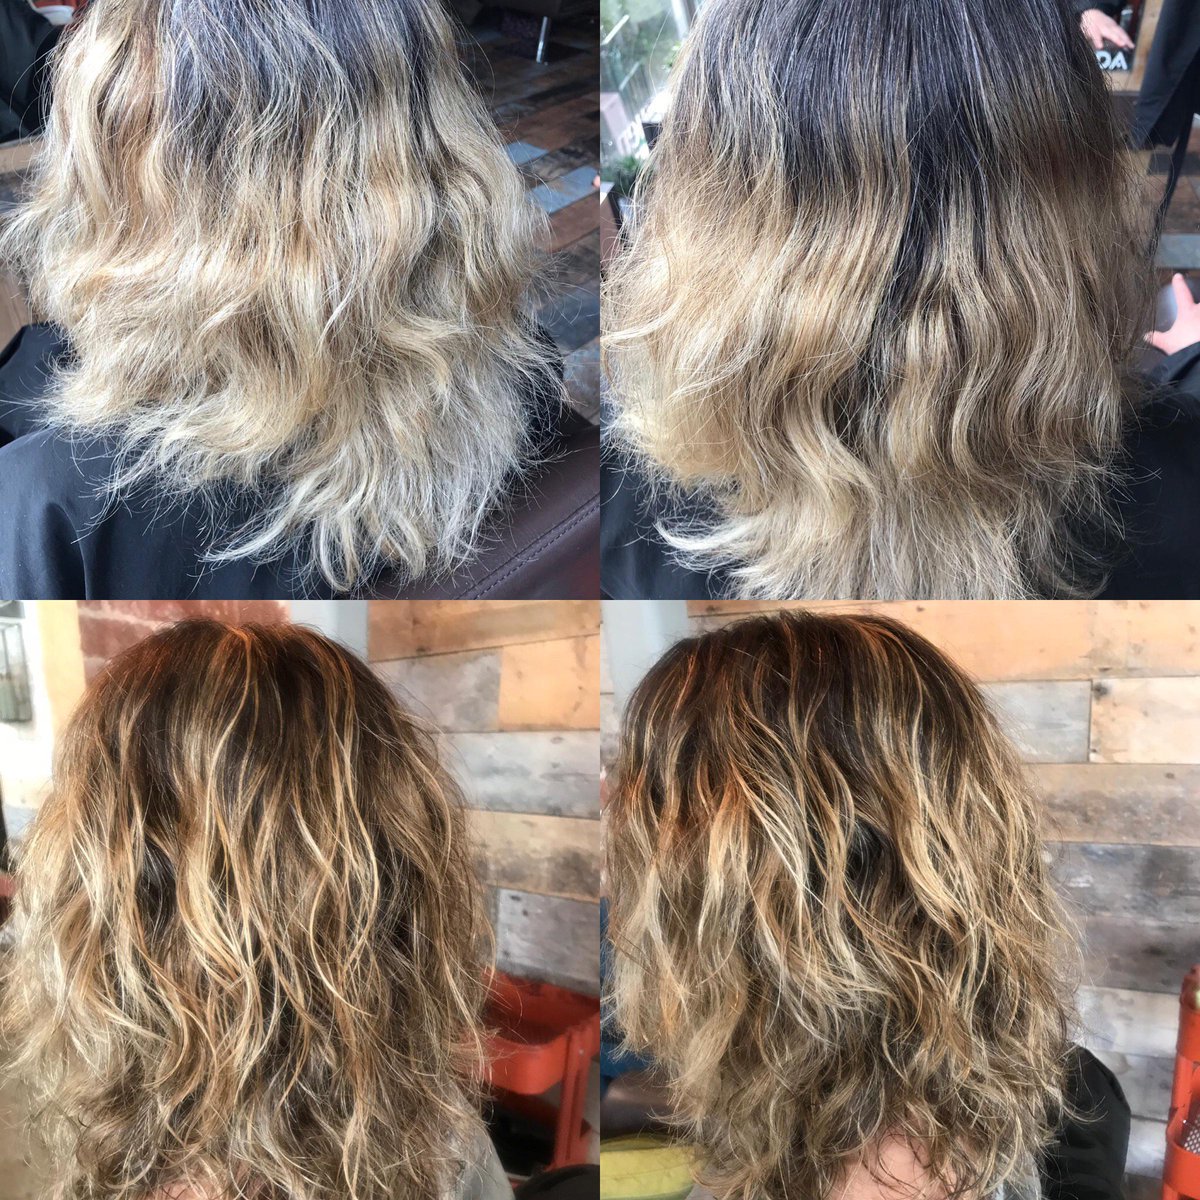 😍😍Broken up with a few tones... Finished with a shadow root.... styled with #TextureTonic 👌 Perfect 👌 #syaveda #salon #smellslikeaveda #treatyourself #colour #texture #swansea #swanseahair